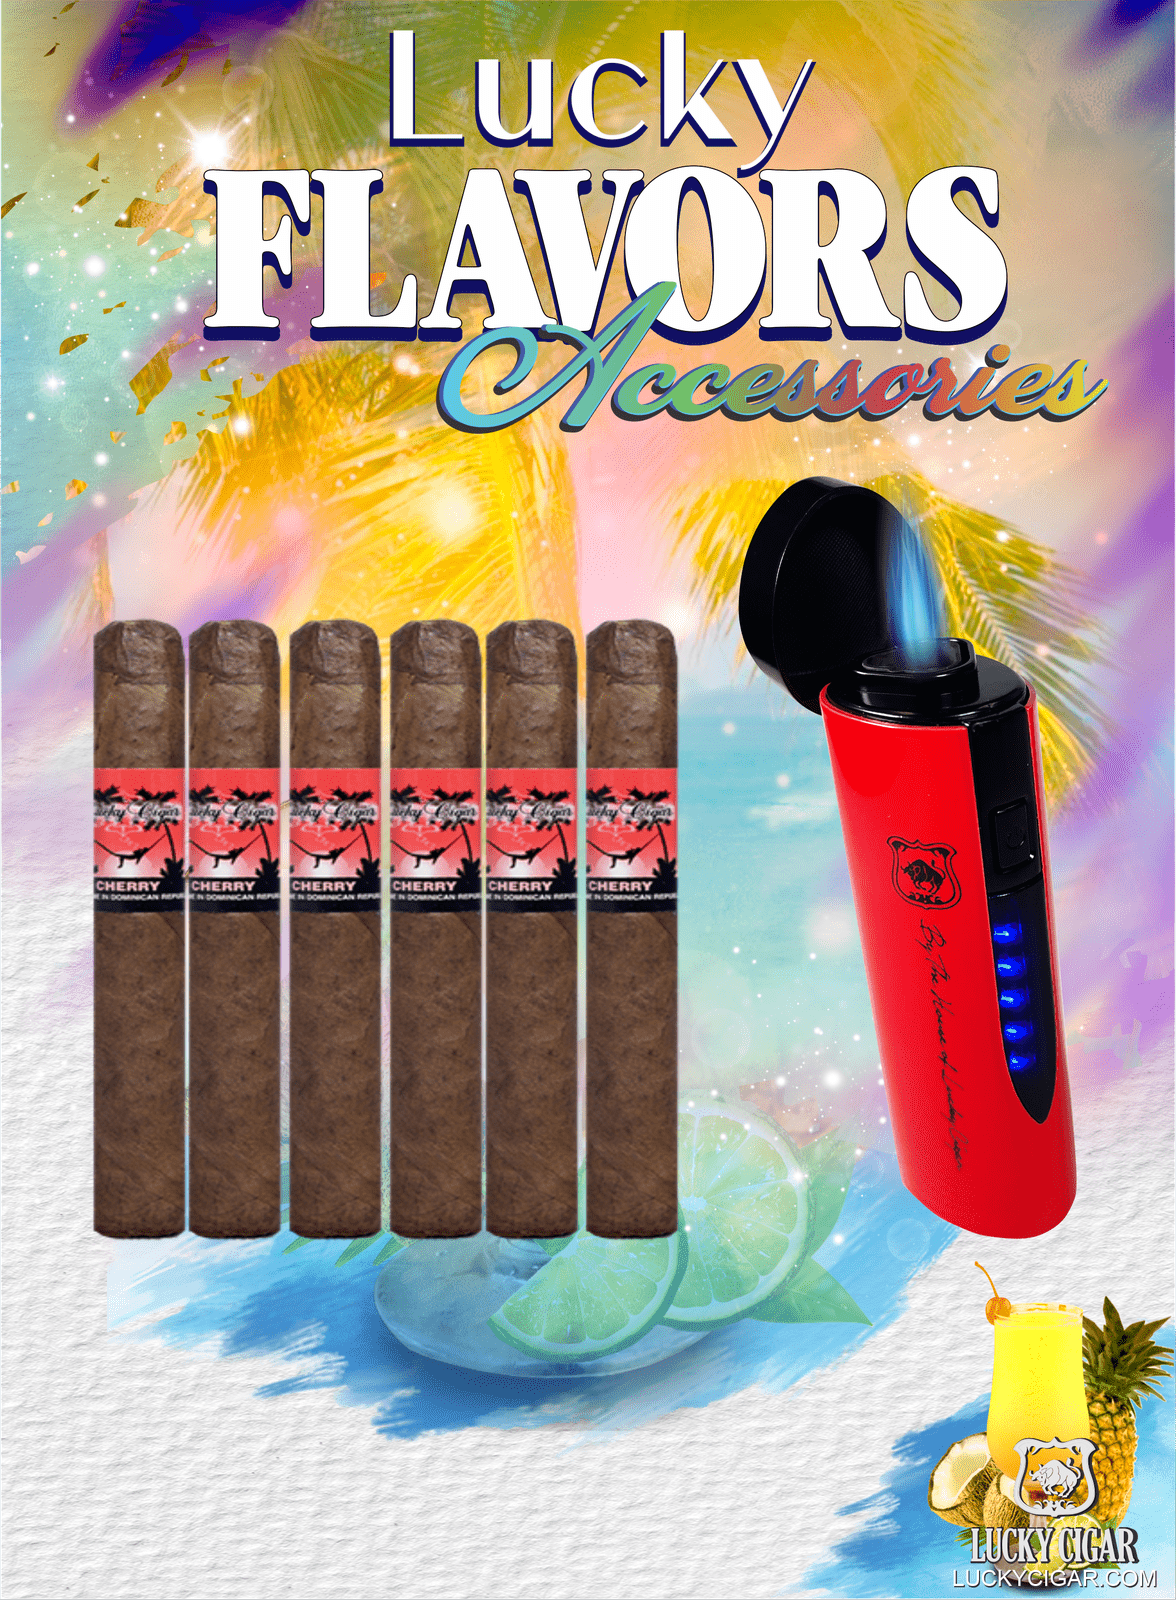 Flavored Cigars: Lucky Flavors 7 Cherry Cigar Set with Torch Lighter